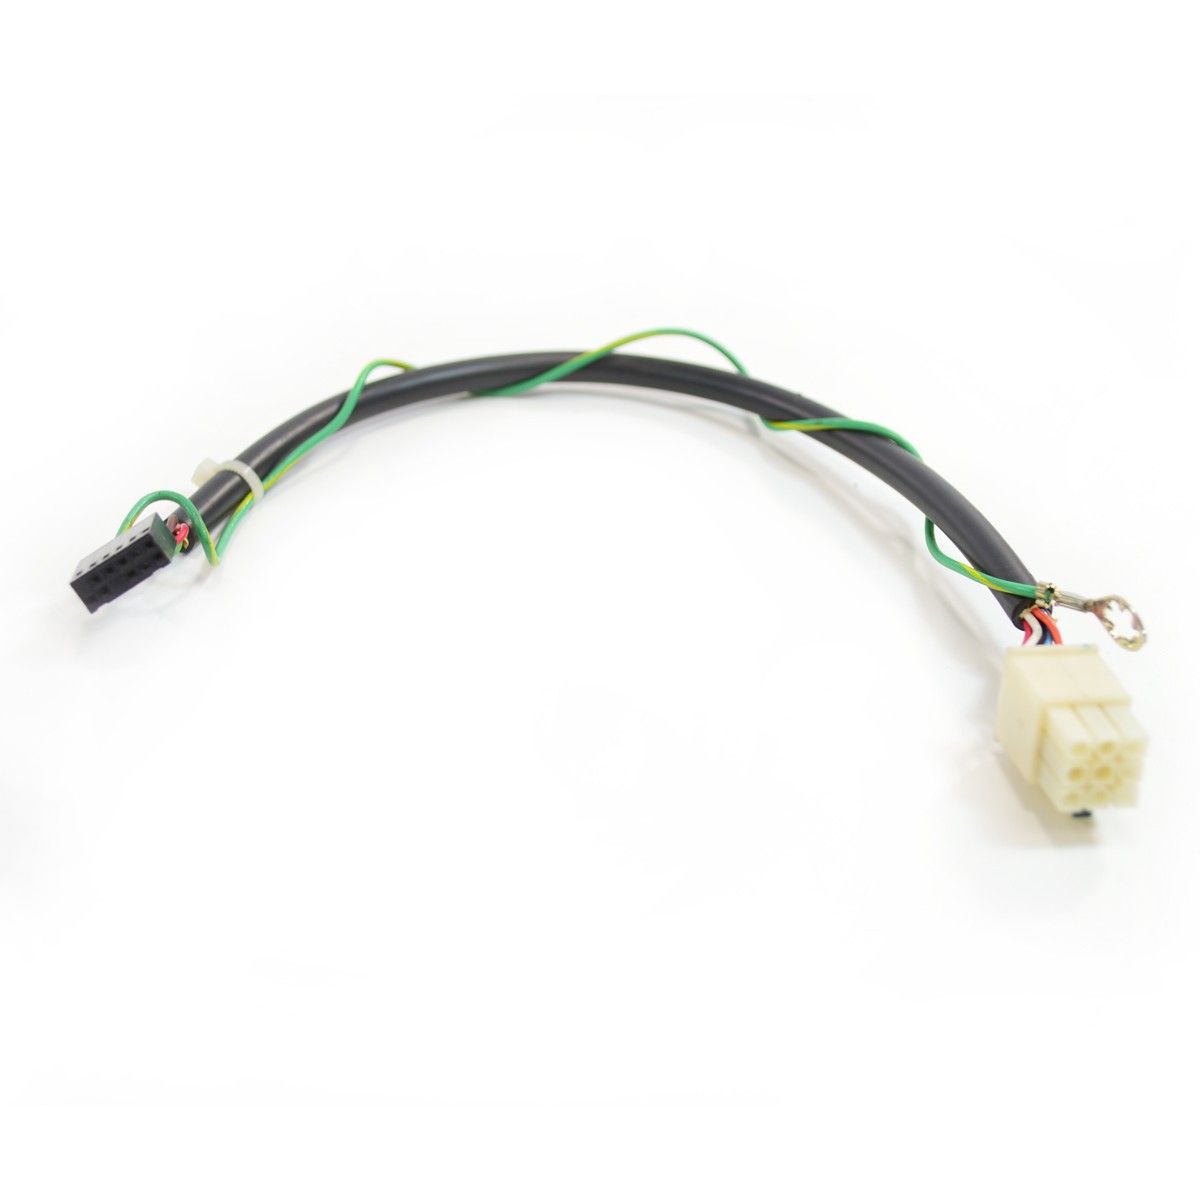 Conversion Cable Harness MAKA to MEI Mars bill acceptor VFM VN AE 2000 110 volts 